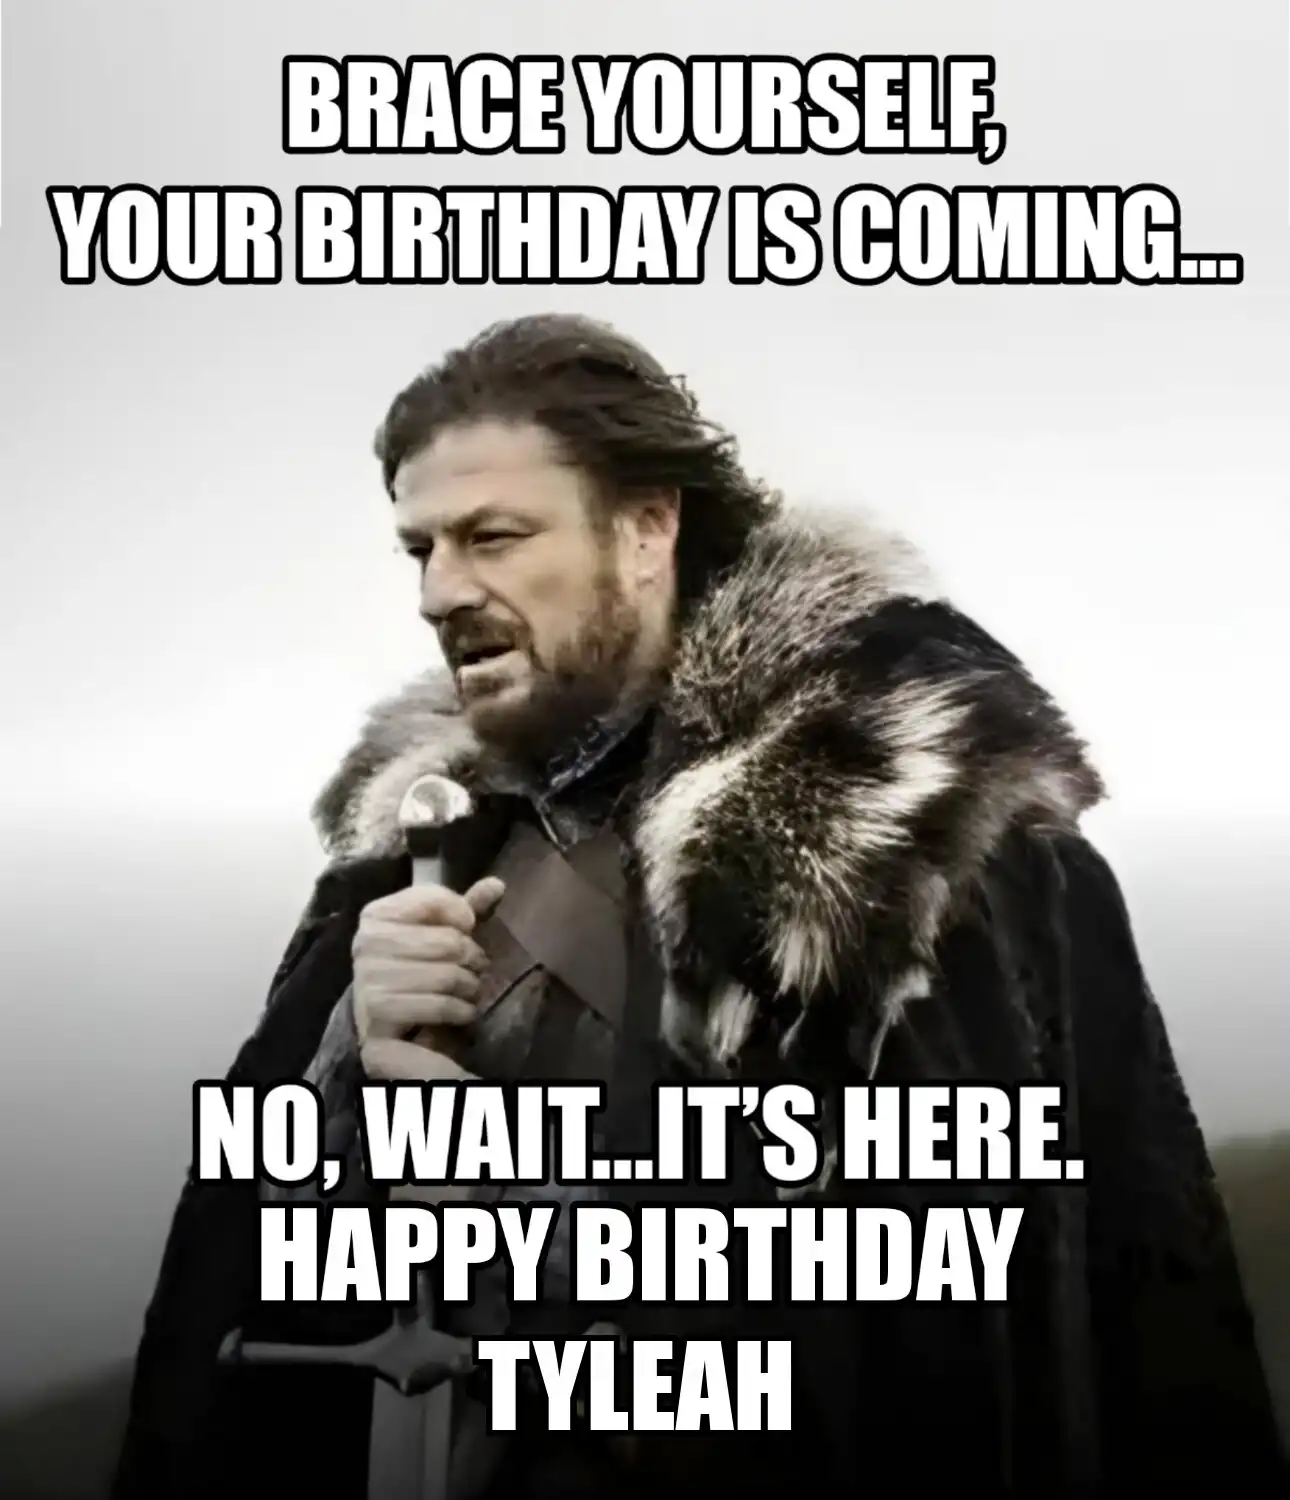 Happy Birthday Tyleah Brace Yourself Your Birthday Is Coming Meme